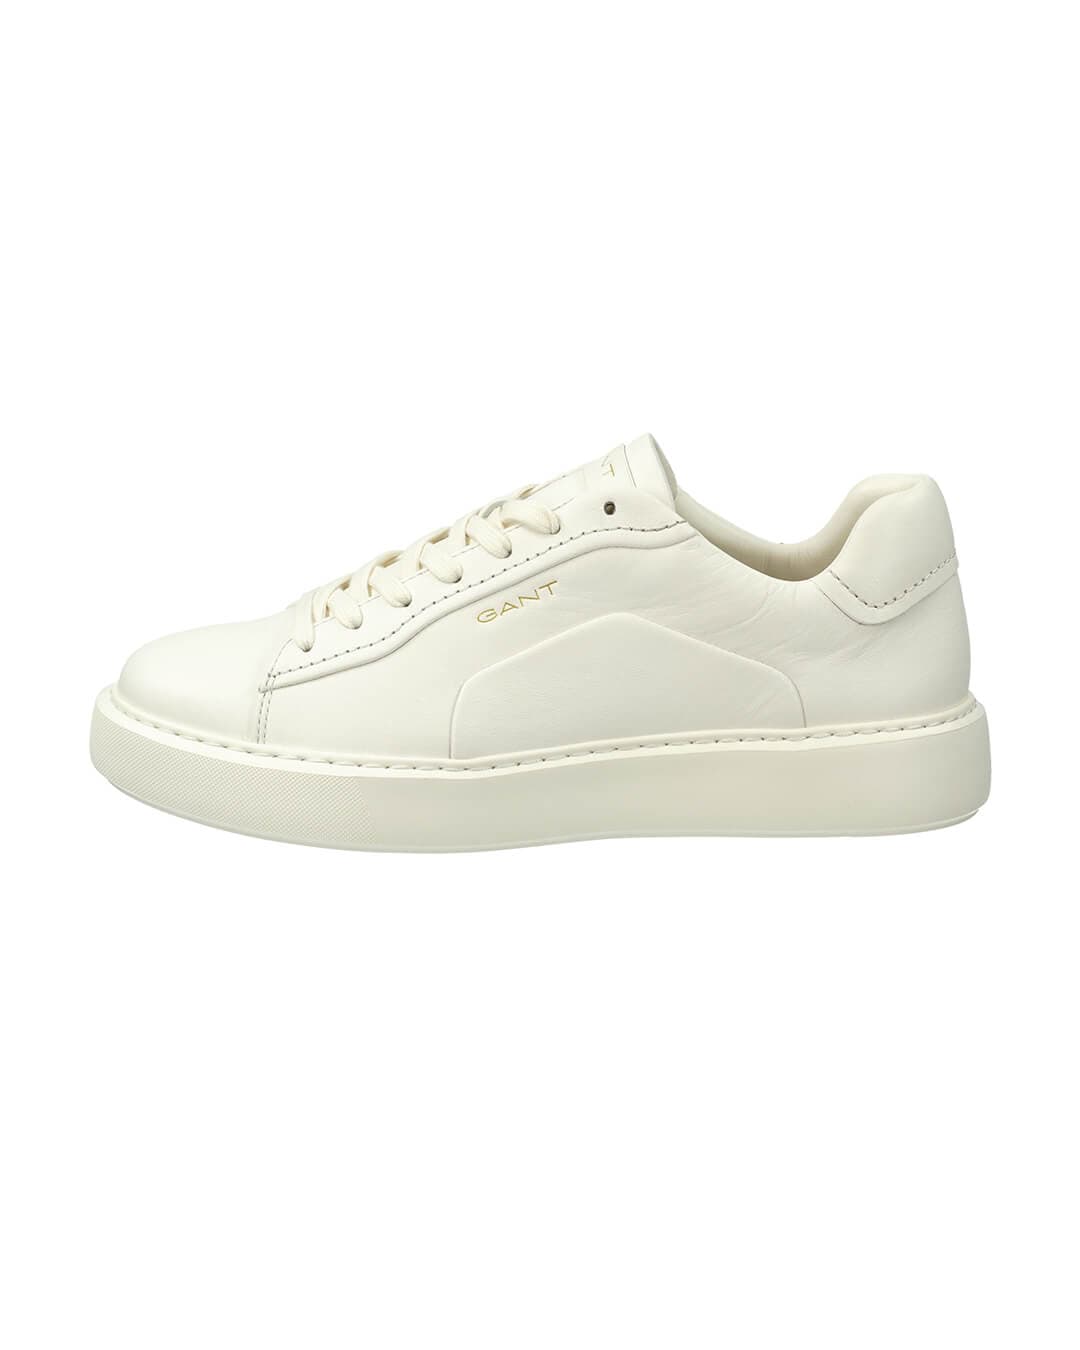 Gant Shoes Gant Off White Zonick Sneakers